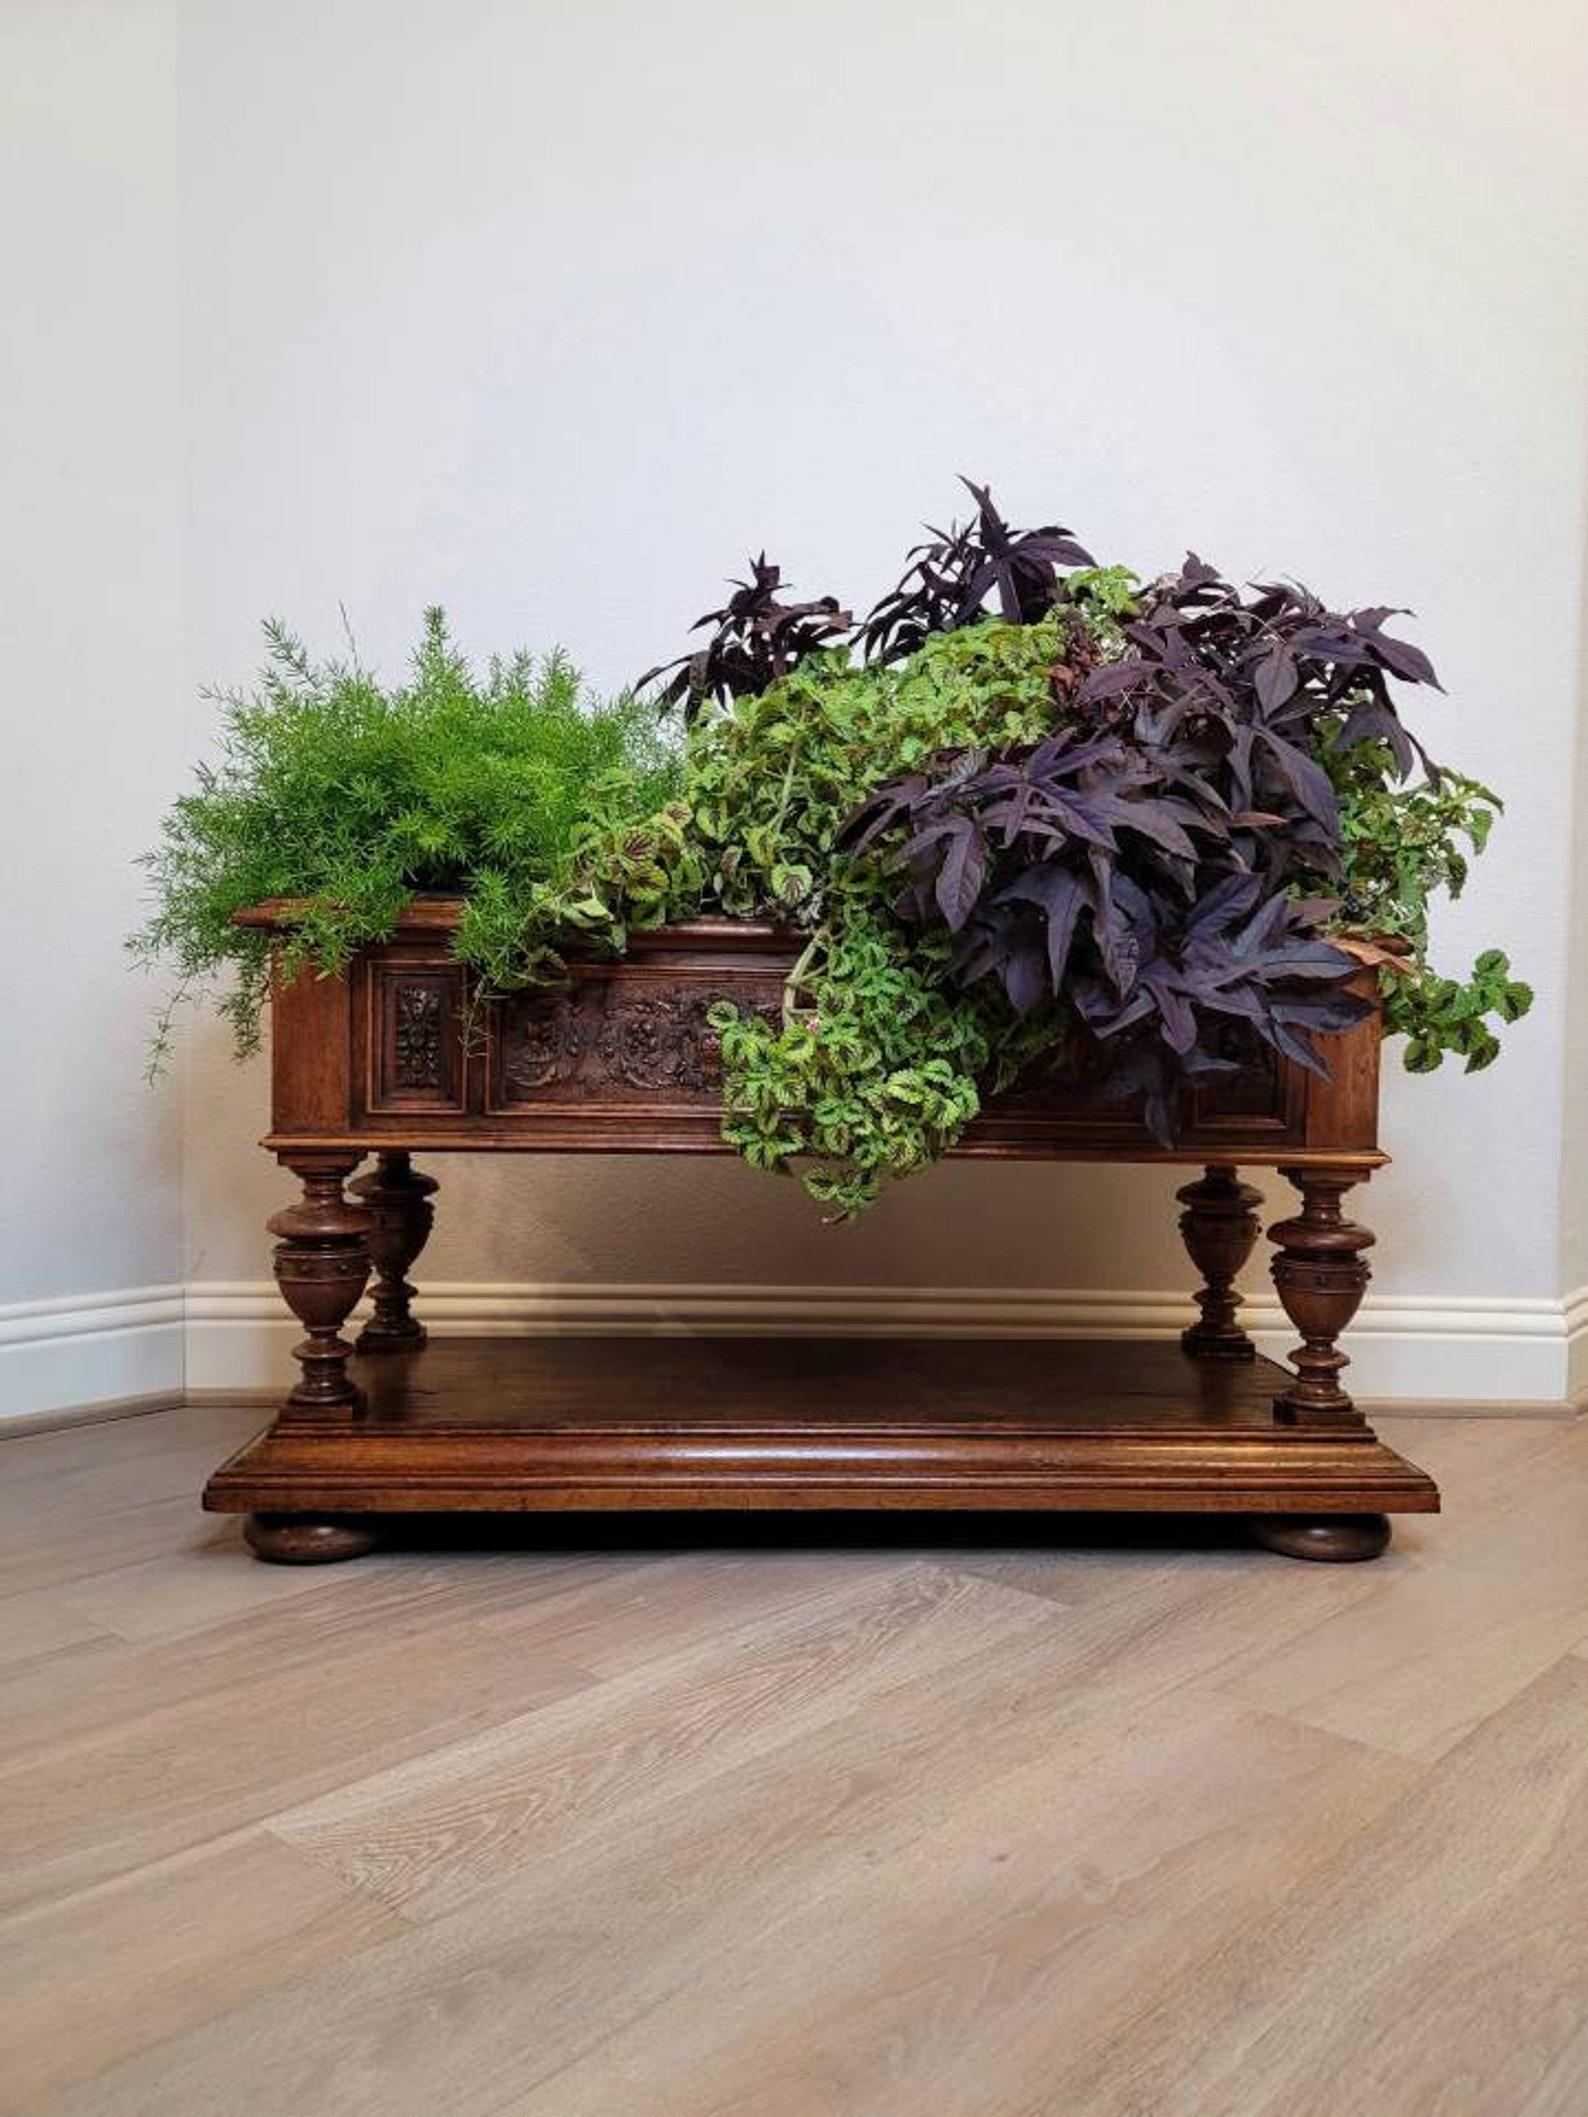 A magnificent antique, circa 1880, Italian Renaissance Revival style jardinière with warm, rustic beautifully aged patina! (plant stand - indoor planter - conservatory or solarium garden box - flower display)

Born in Italy in the late 19th